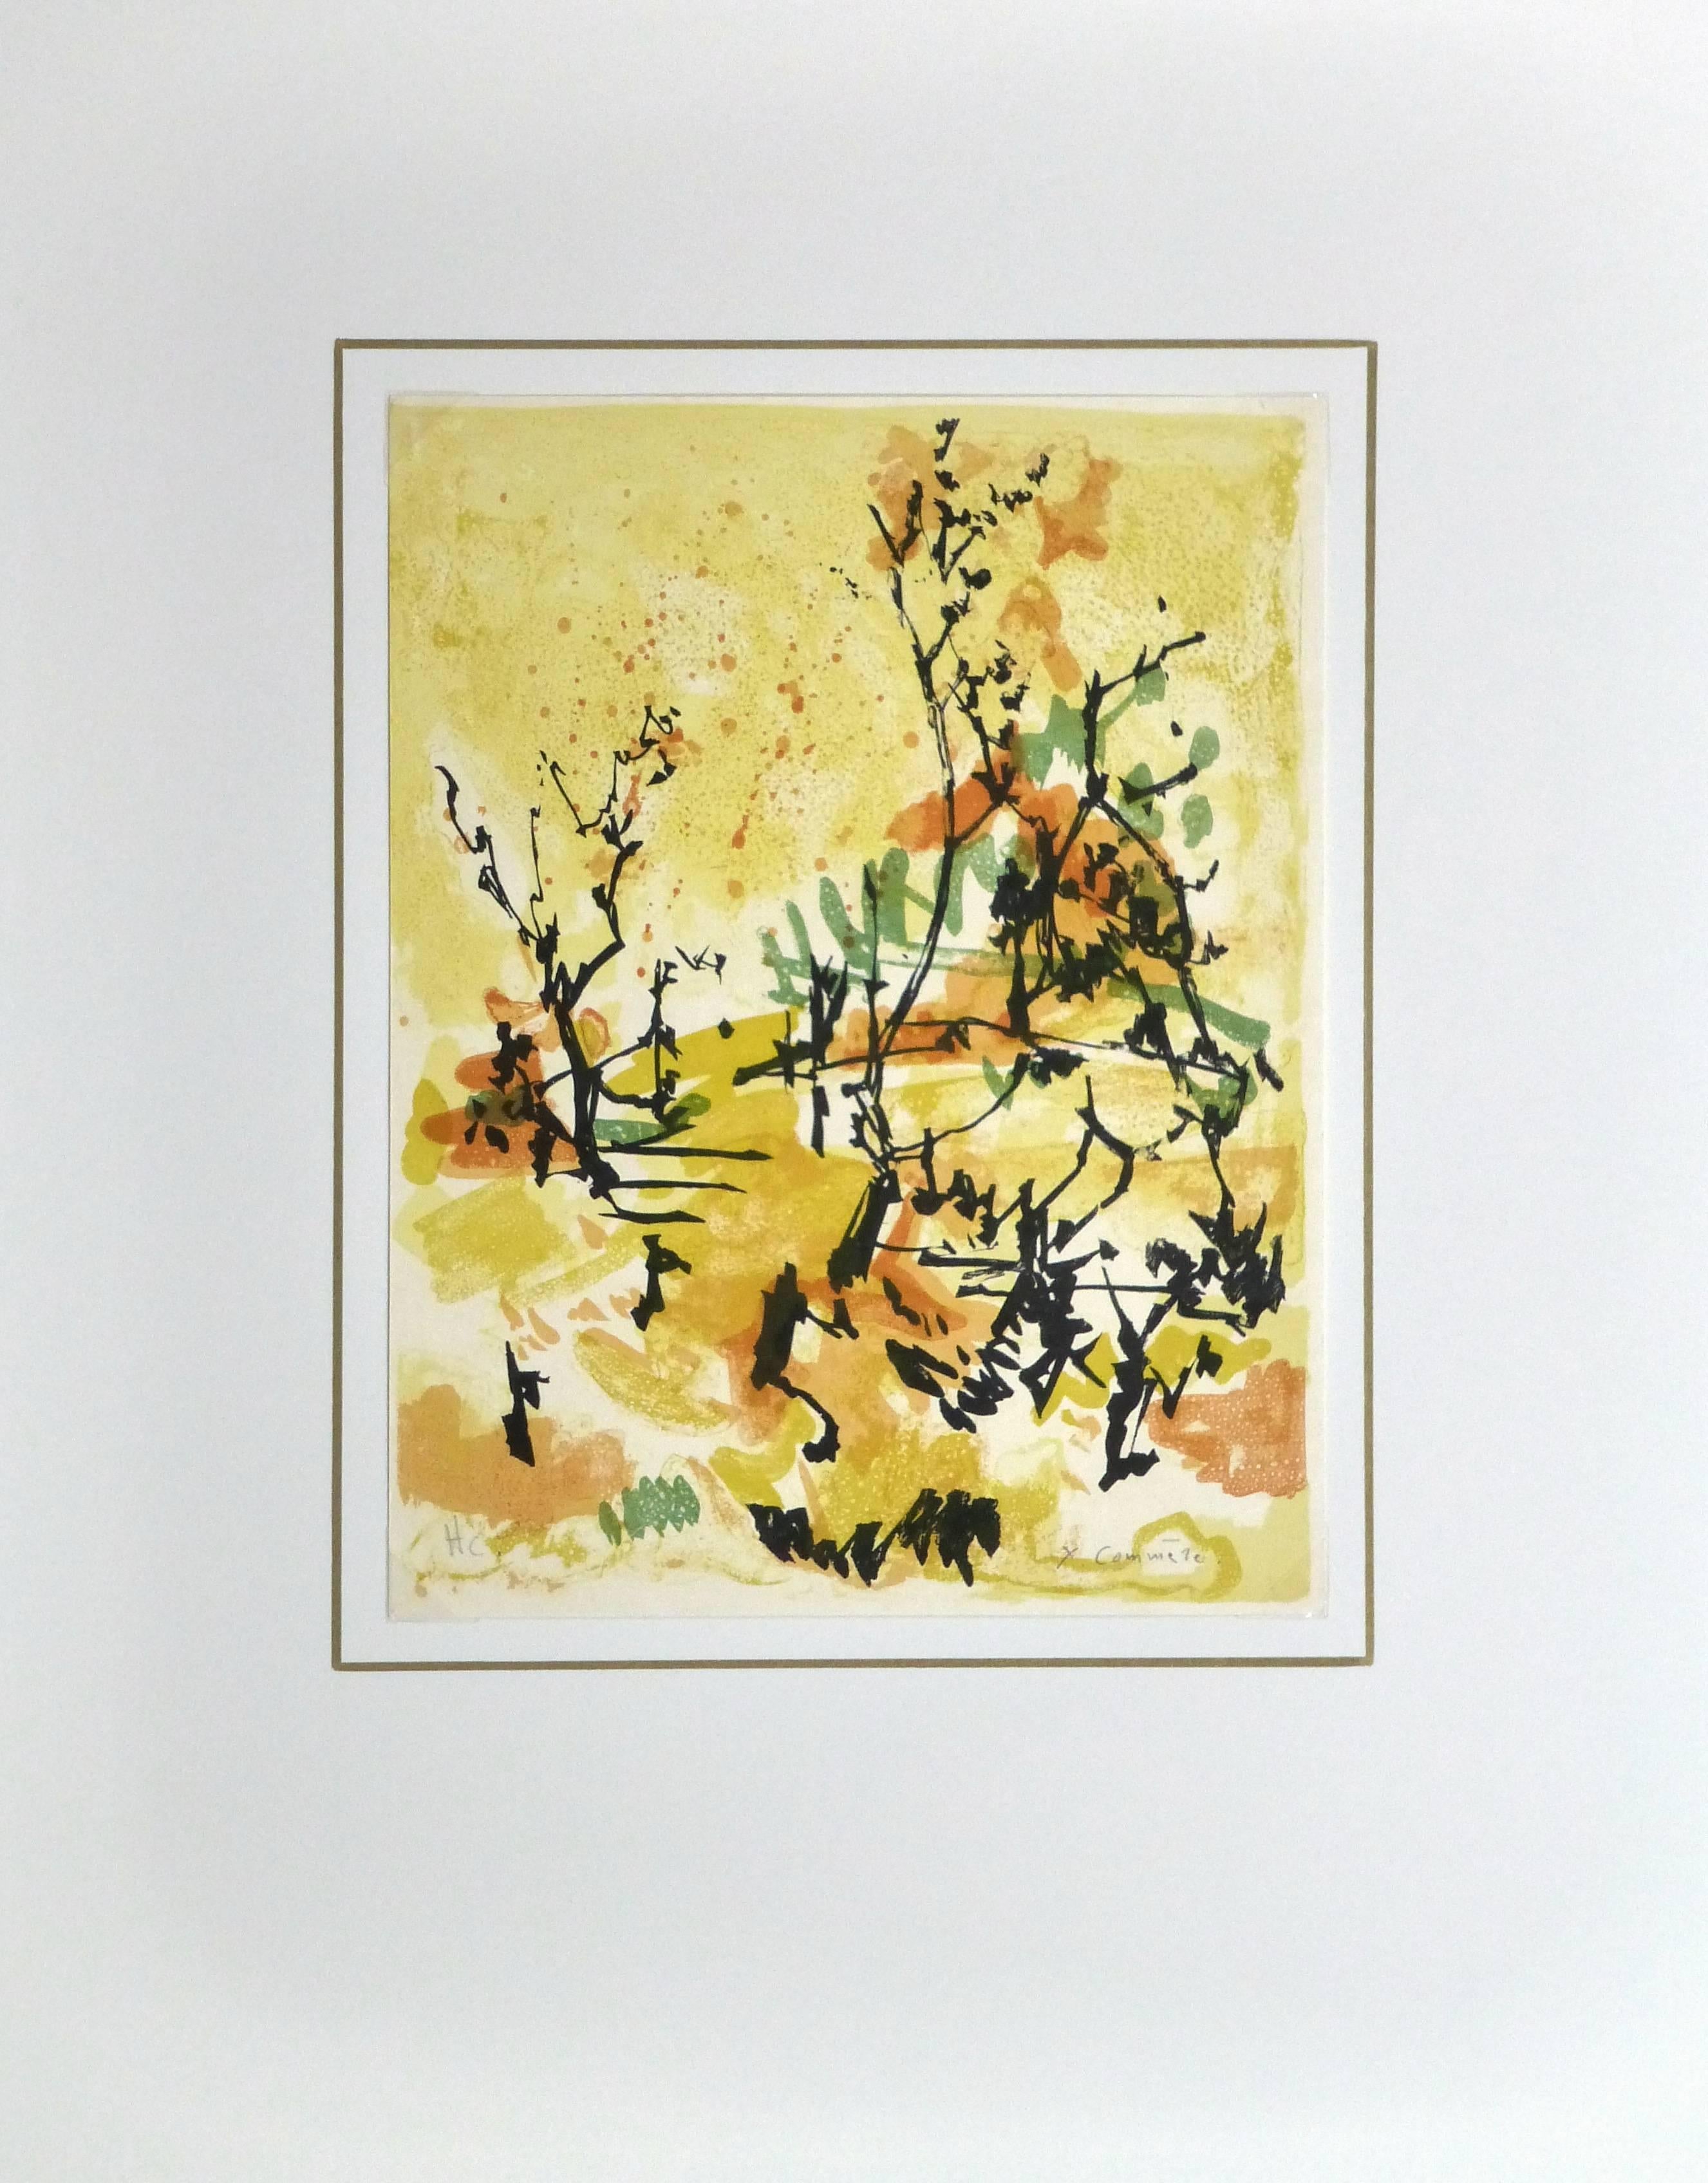 Warmly hued fine art lithograph of a abstract rural landscape by French artist Jean Yves Commère, circa 1960. Signed lower right.

Original artwork on paper displayed on a white mat with a gold border. Archival plastic sleeve and Certificate of